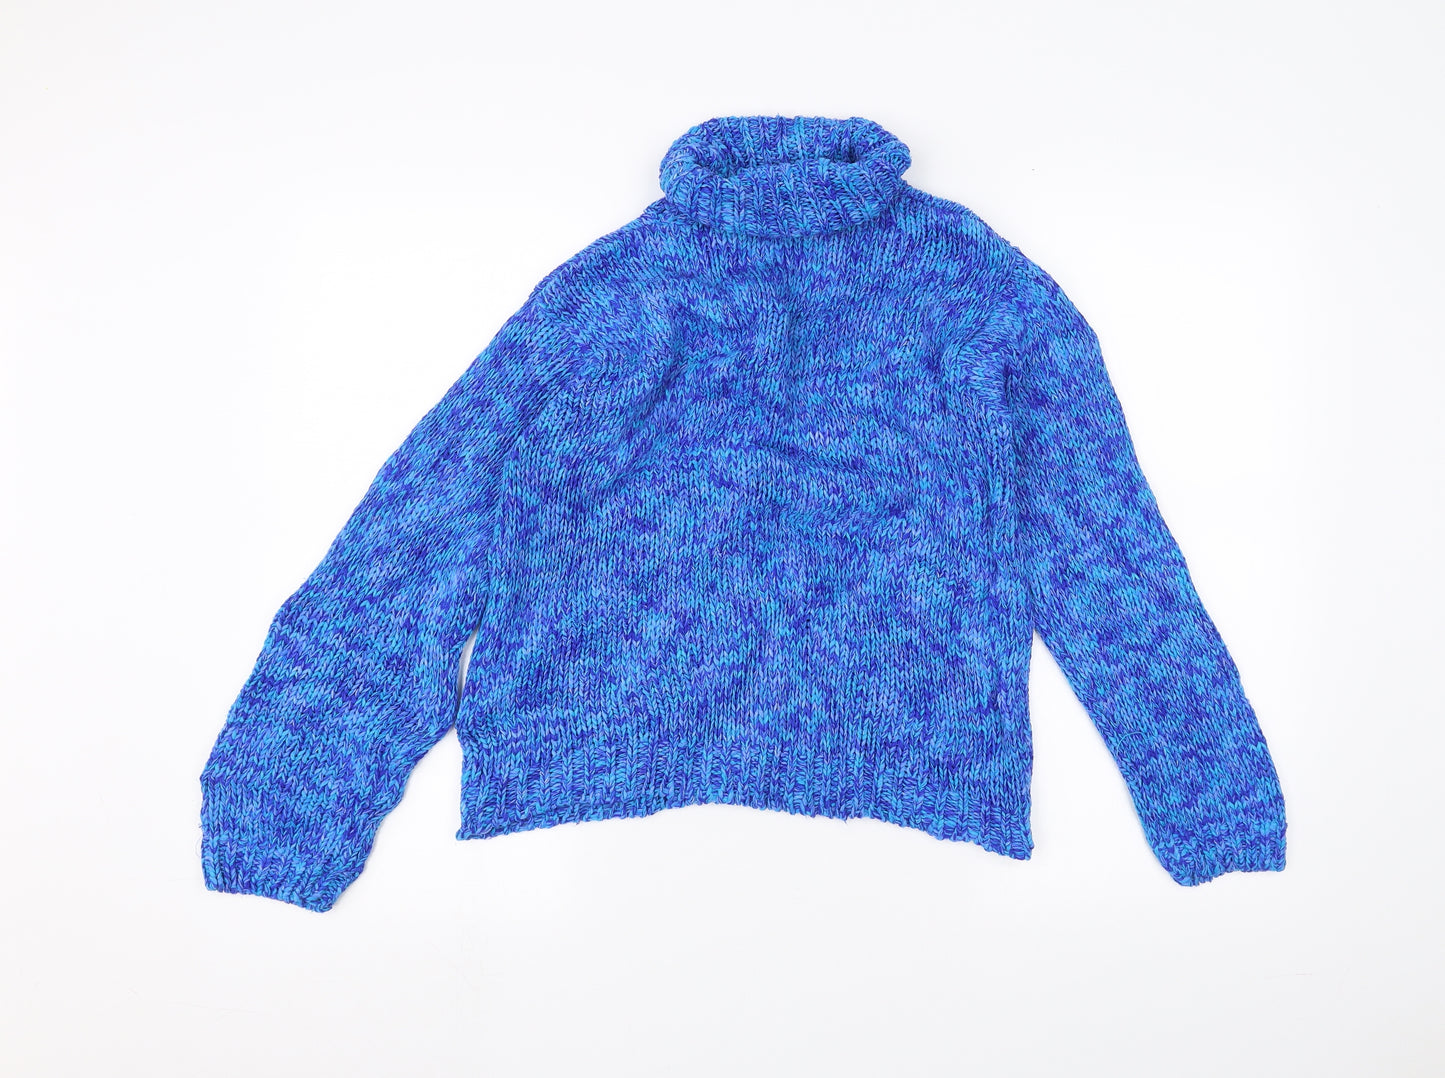 mackays Girls Blue   Pullover Jumper Size 13-14 Years